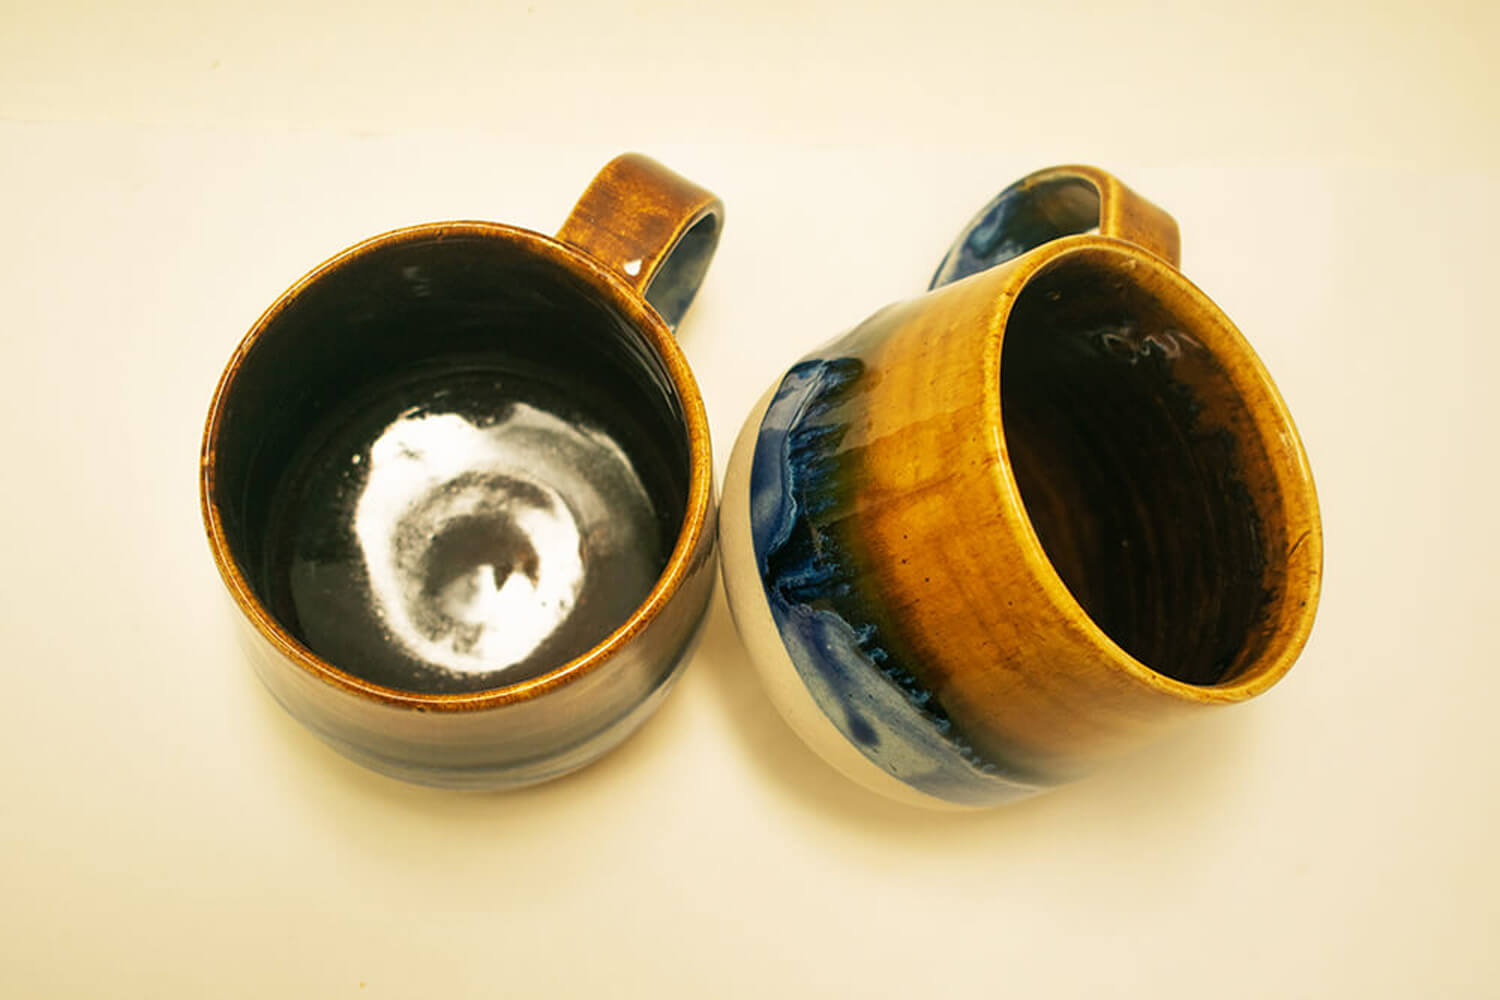 Buy Handcrafted Tableware and Serve ware, Online